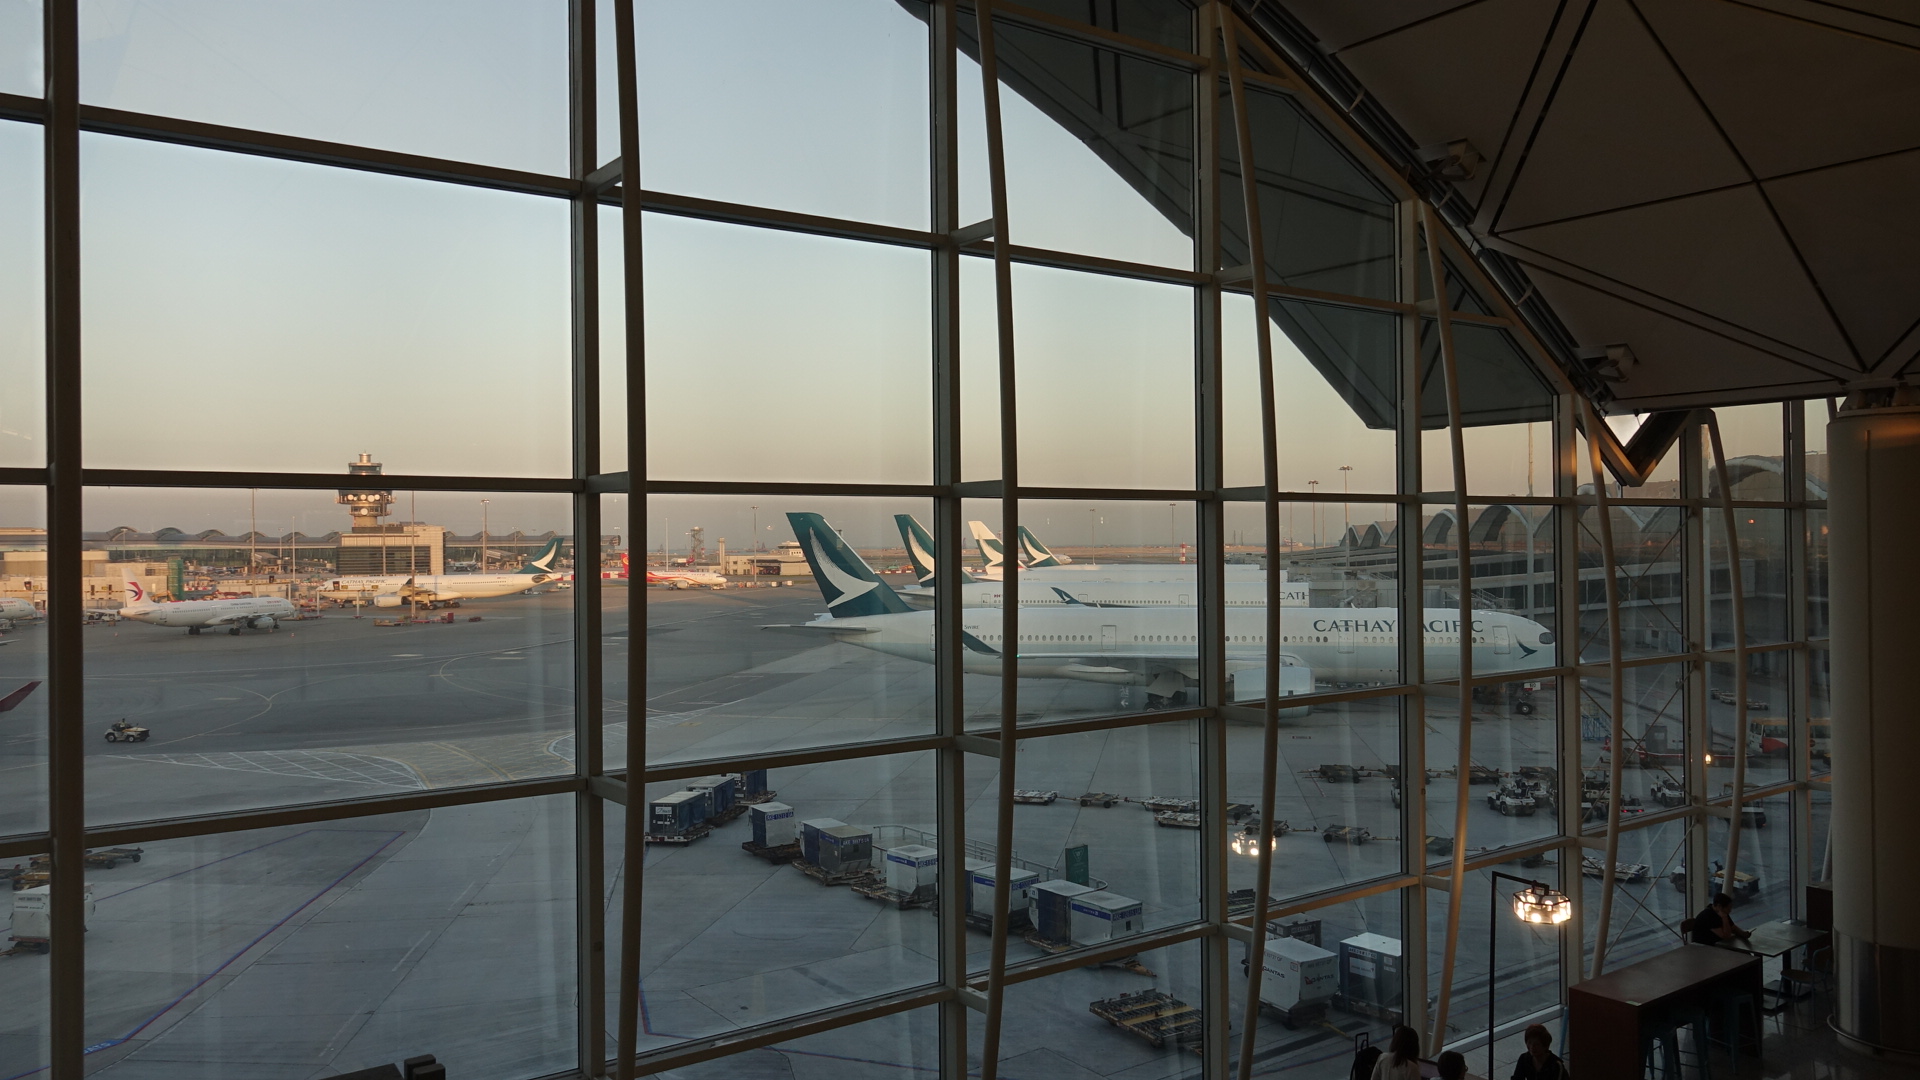 a large window with many windows and airplanes on the ground